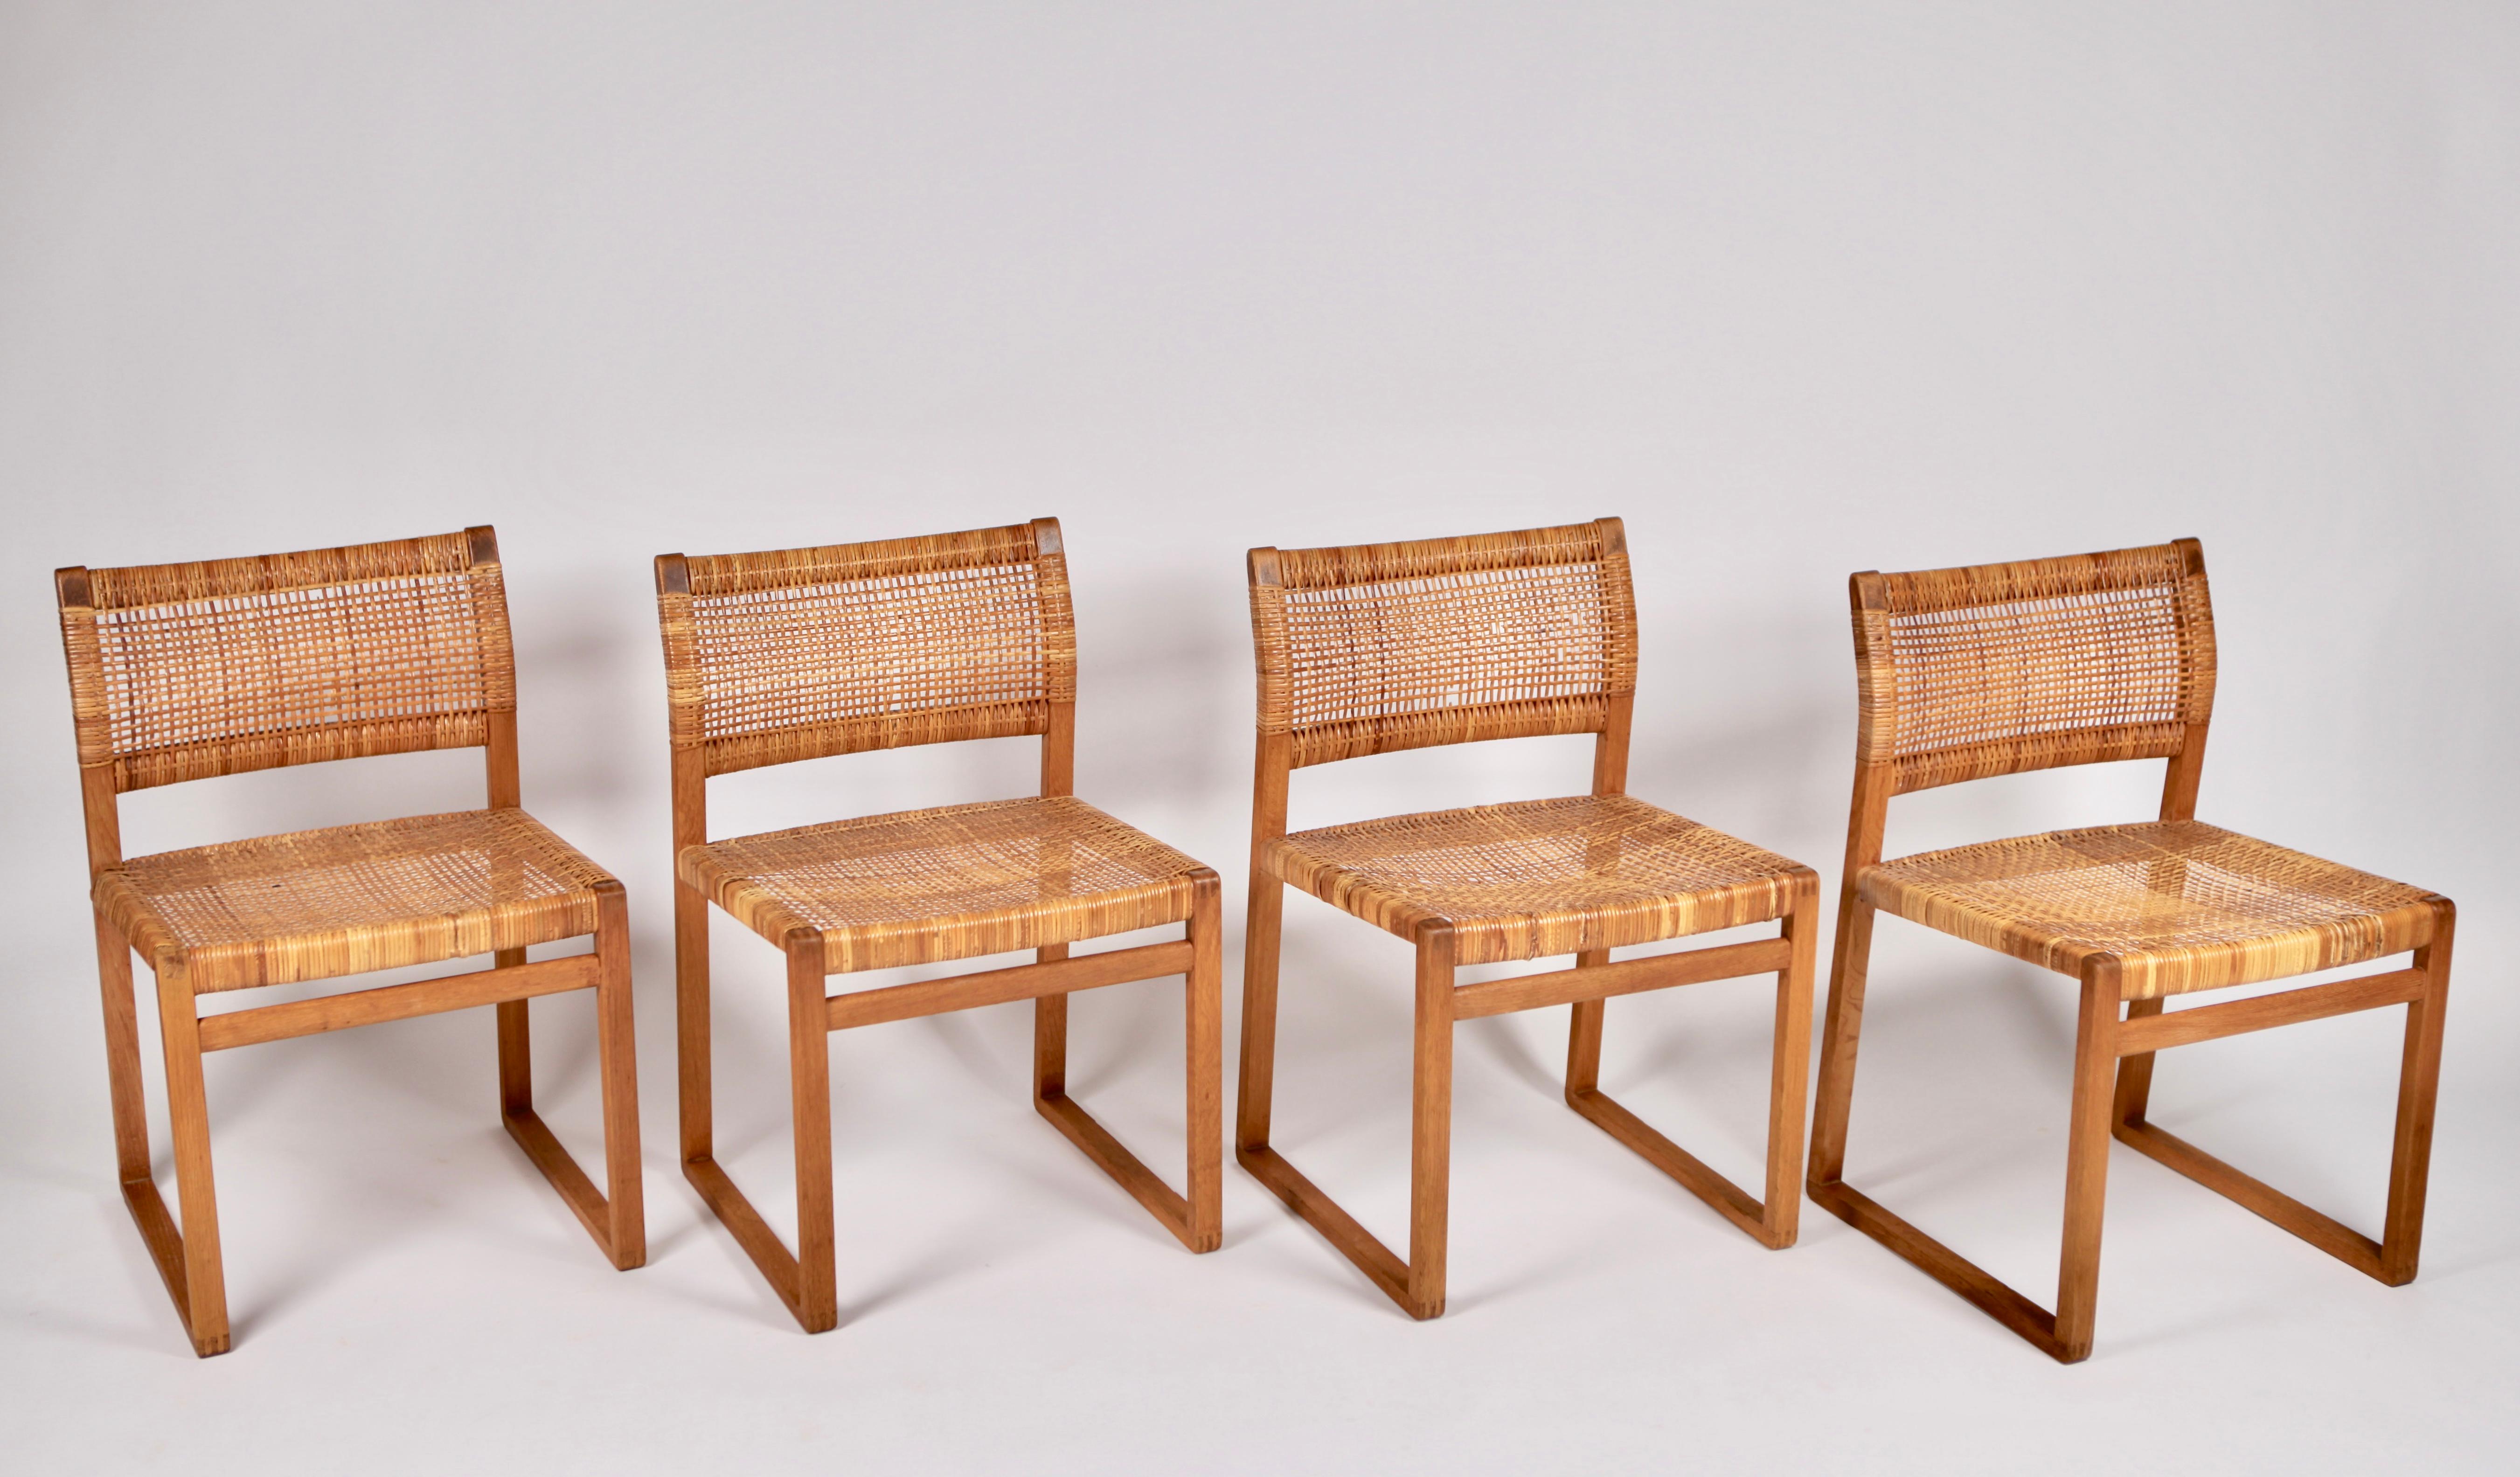 A set of 4 Børge Mogensen dining chairs BM 61 and in solid oak and woven cane from 1957.
Manufactured by Frederica Stolefabrik in Denmark.